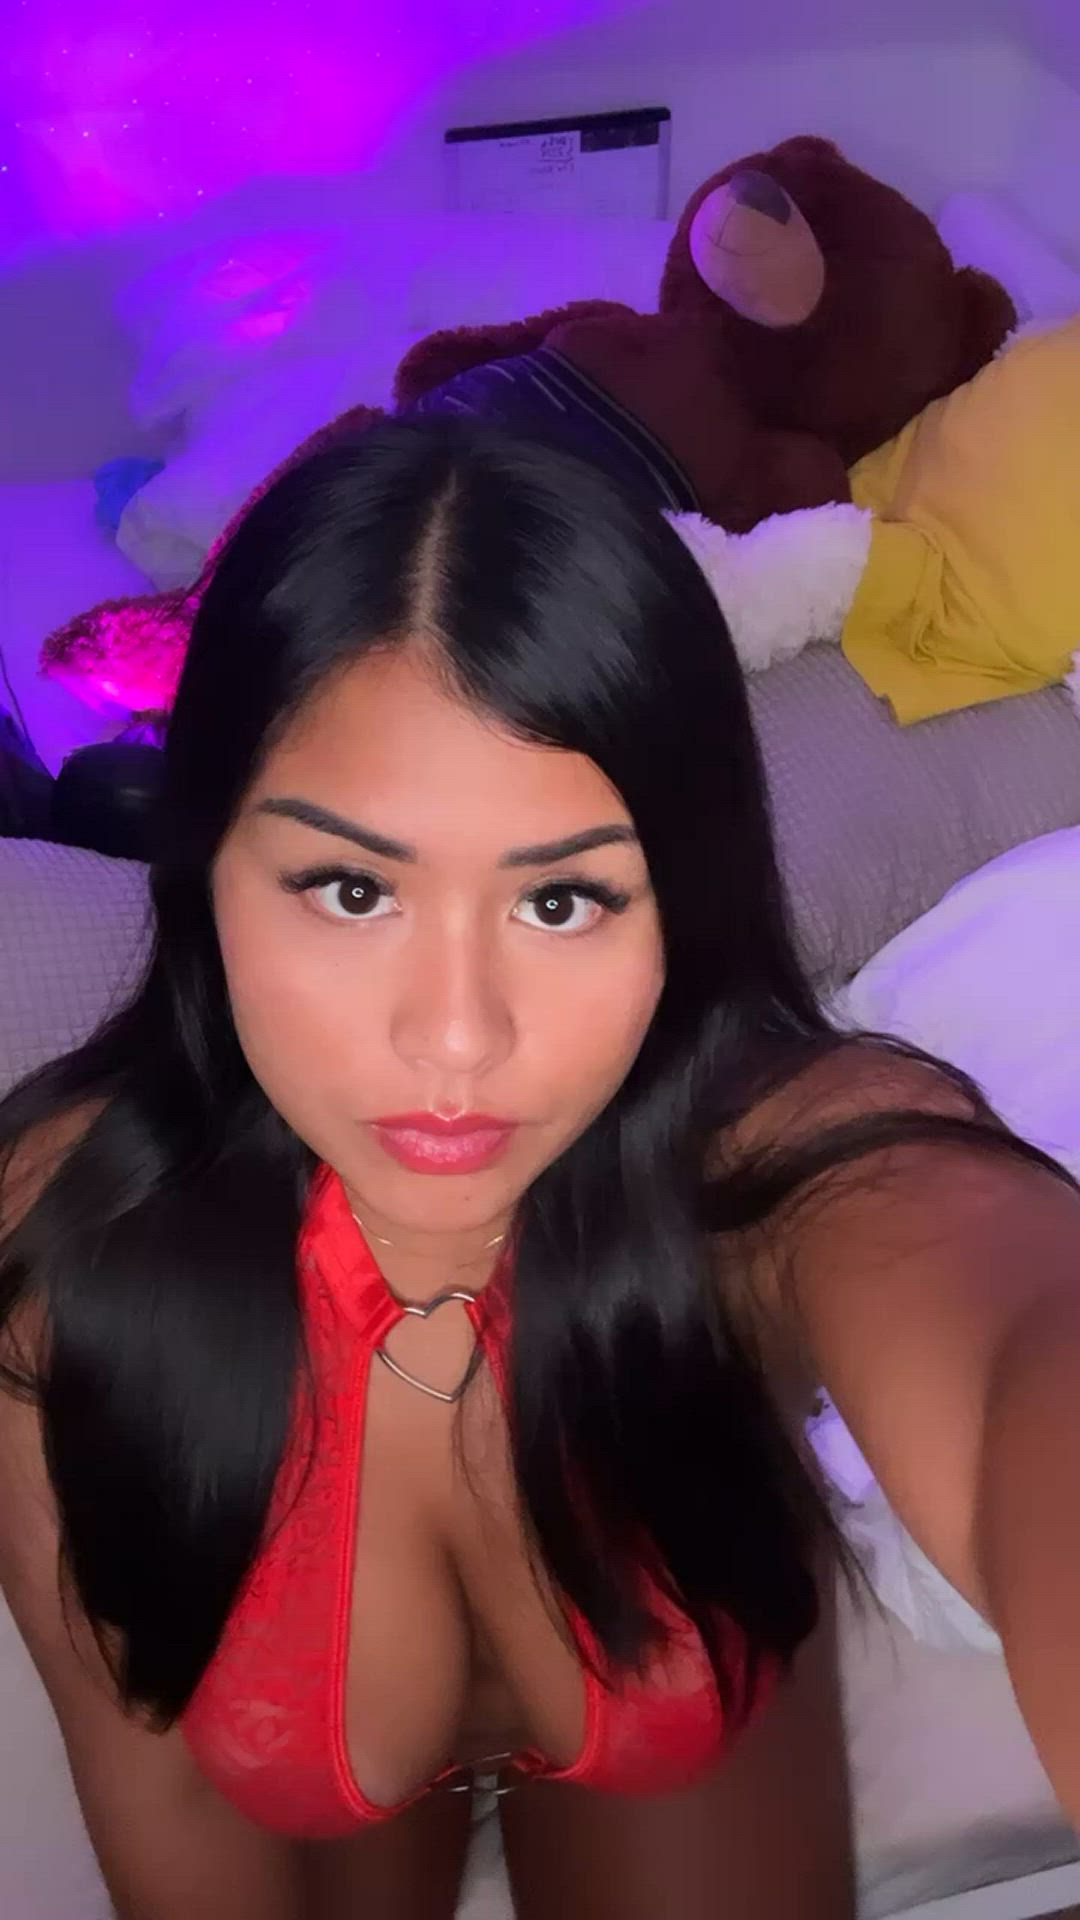 Big Tits porn video with onlyfans model explodelorena <strong>@loriy.glory</strong>